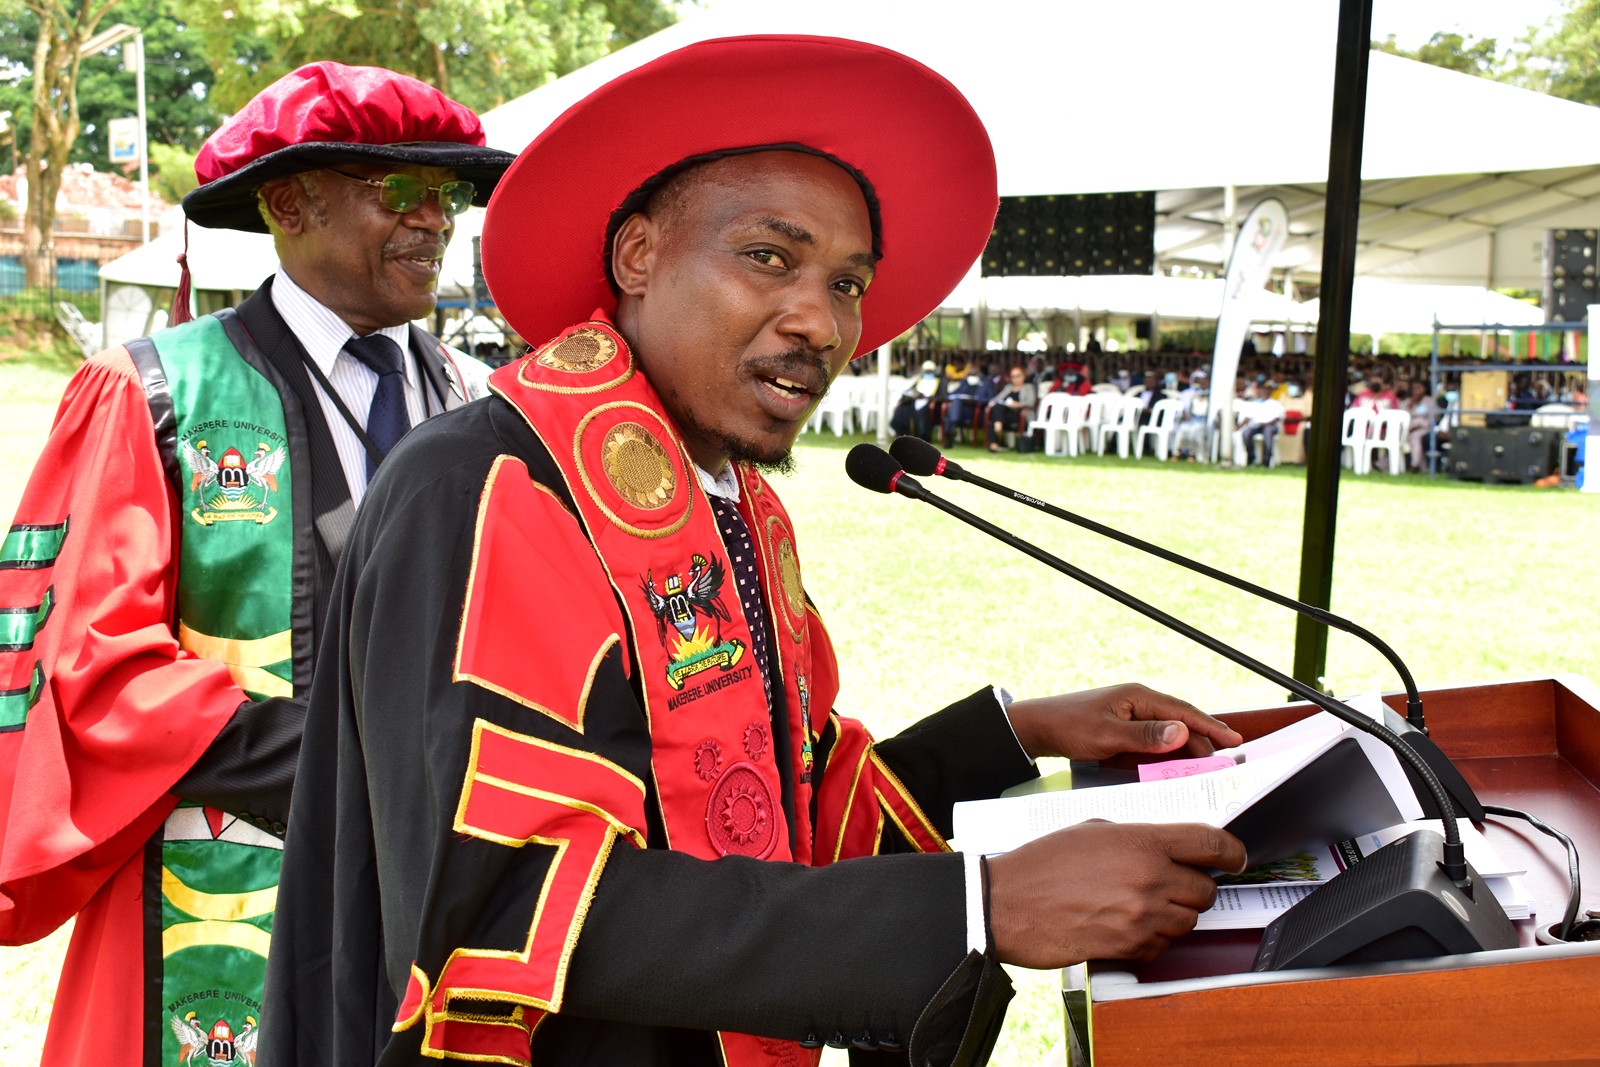 The Principal of CoNAS, Prof. Tumps Winston Ireeta presents PhD graduands at the First Session of Makerere University's 72nd Graduation Ceremony held on 23rd May 2022.